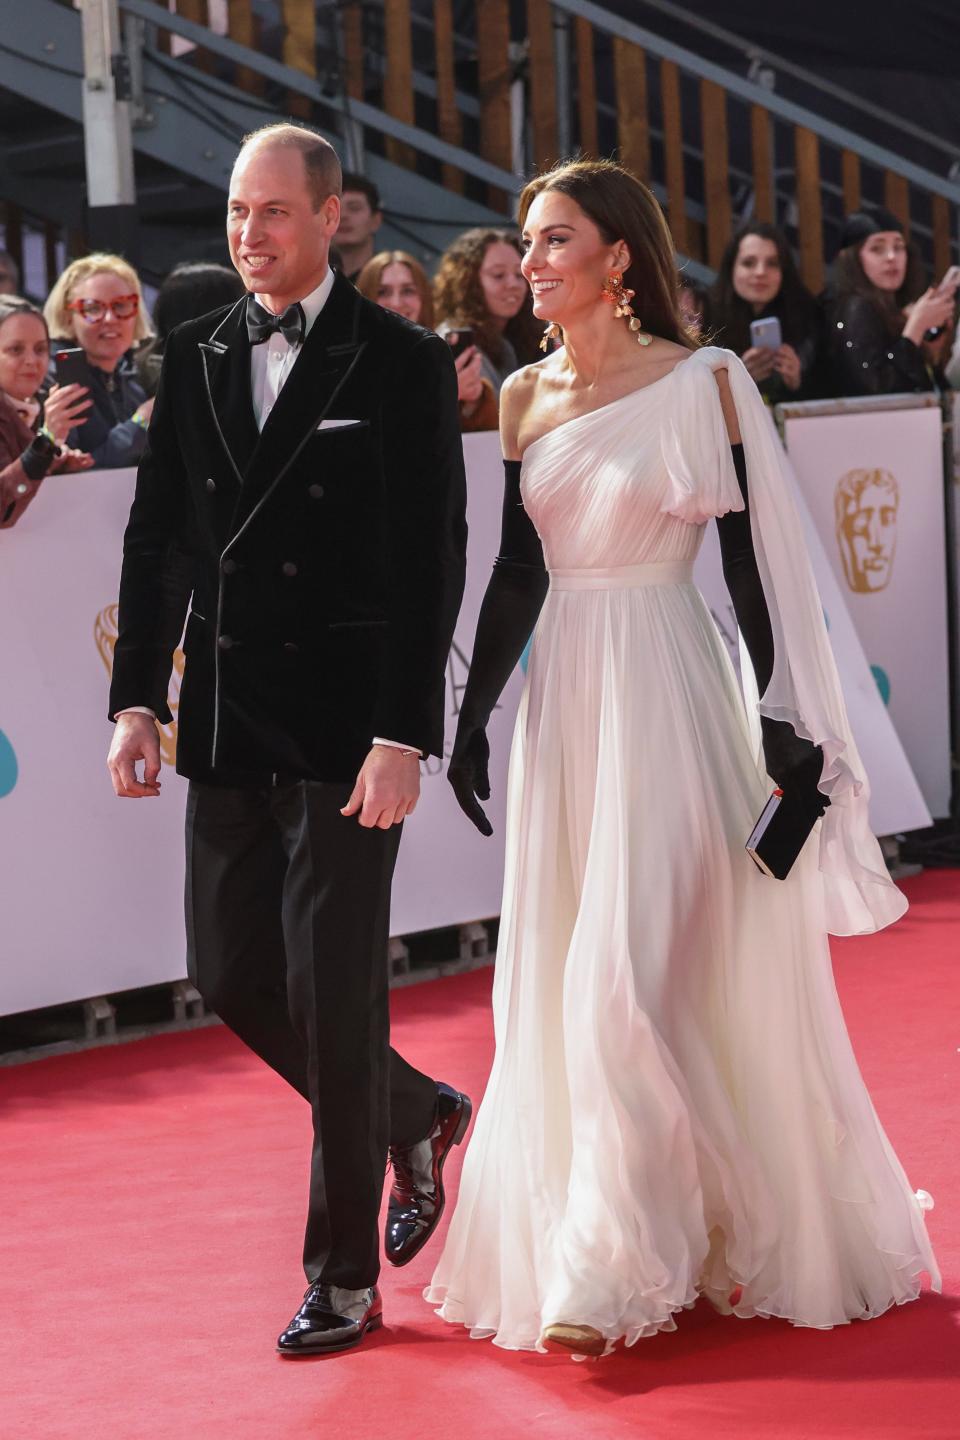 Britain's Prince William, left, and his wife Kate the Princess of Wales pose for photographers upon arrival at the 76th British Academy Film Awards, BAFTA's, in London, Sunday, Feb. 19, 2023